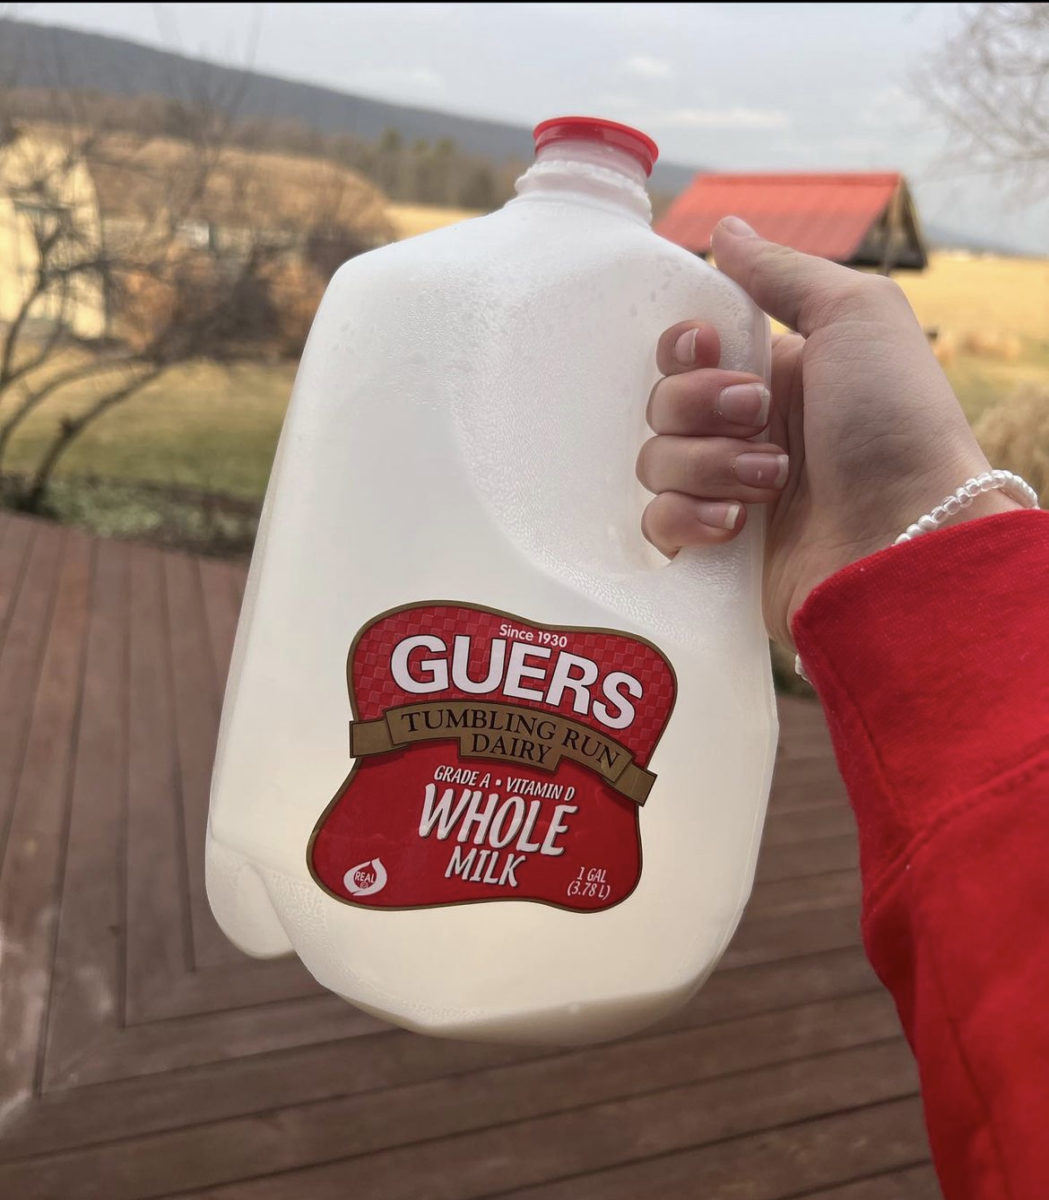 Guers Whole Milk with 13 essential nutrients and 97% fat free.